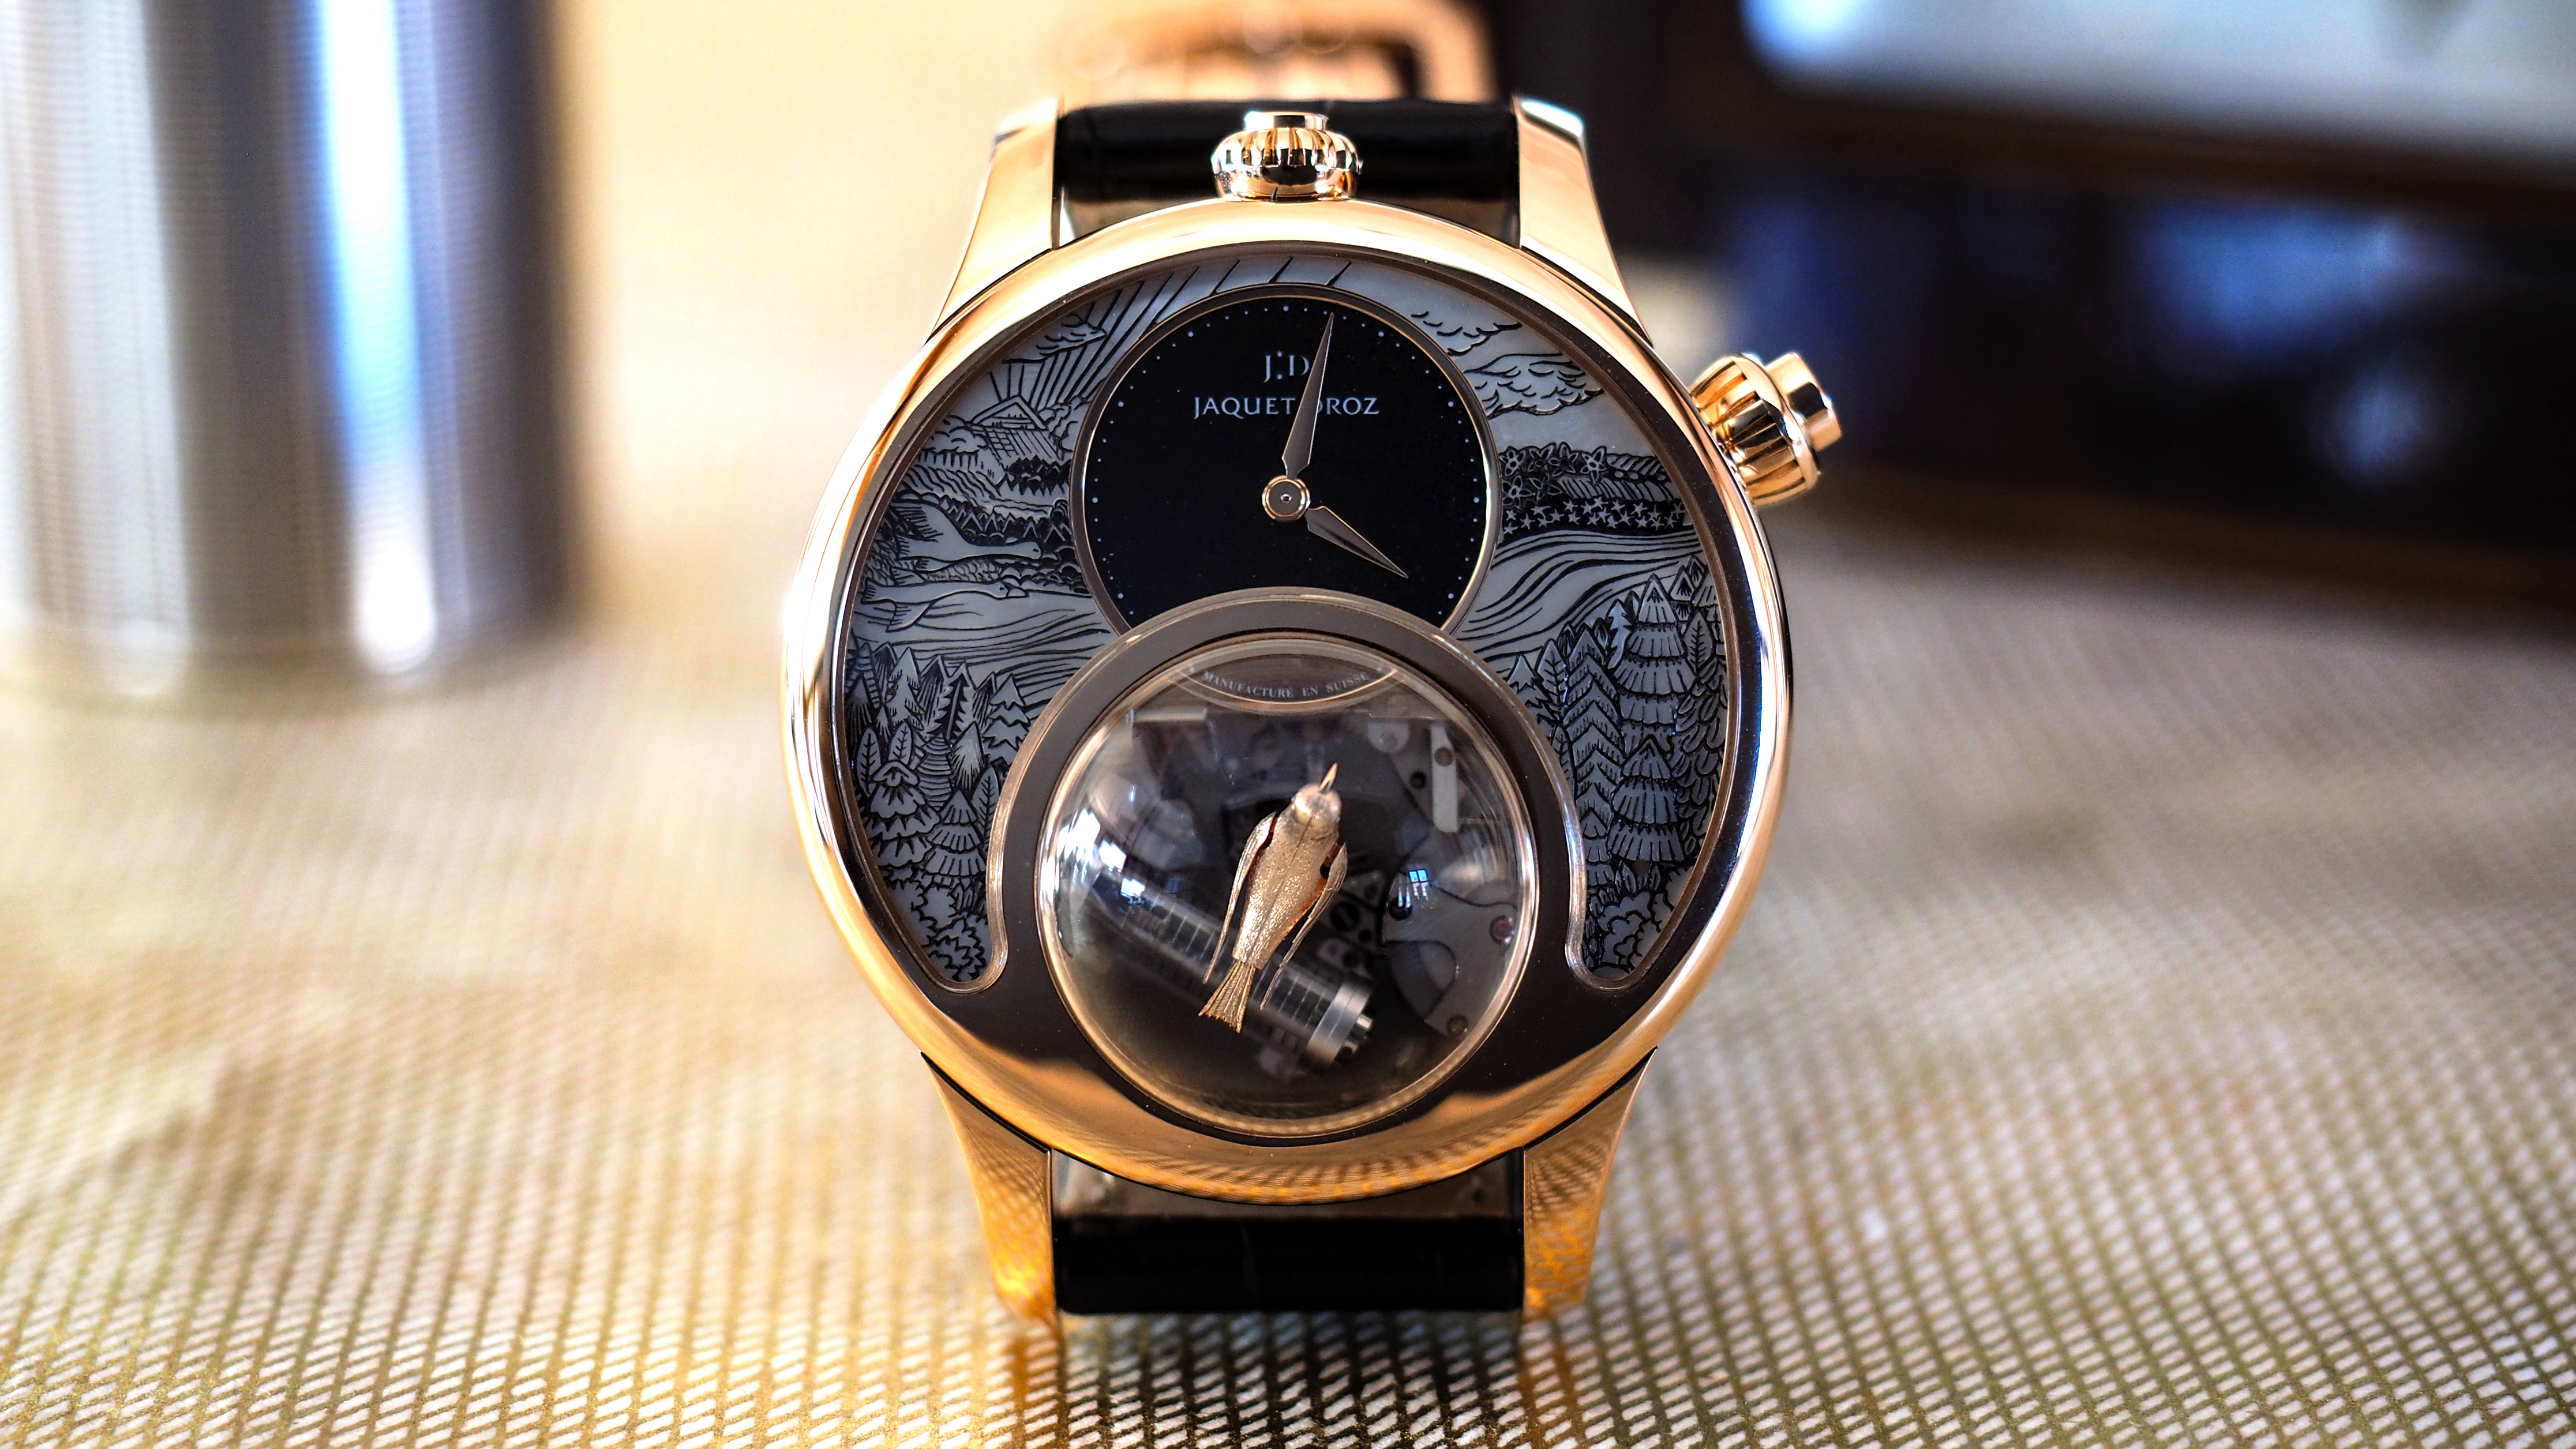 Can a Watch Rock? Exploring the Rolling Stones Automaton by Jaquet Droz -  2LUXURY2.COM